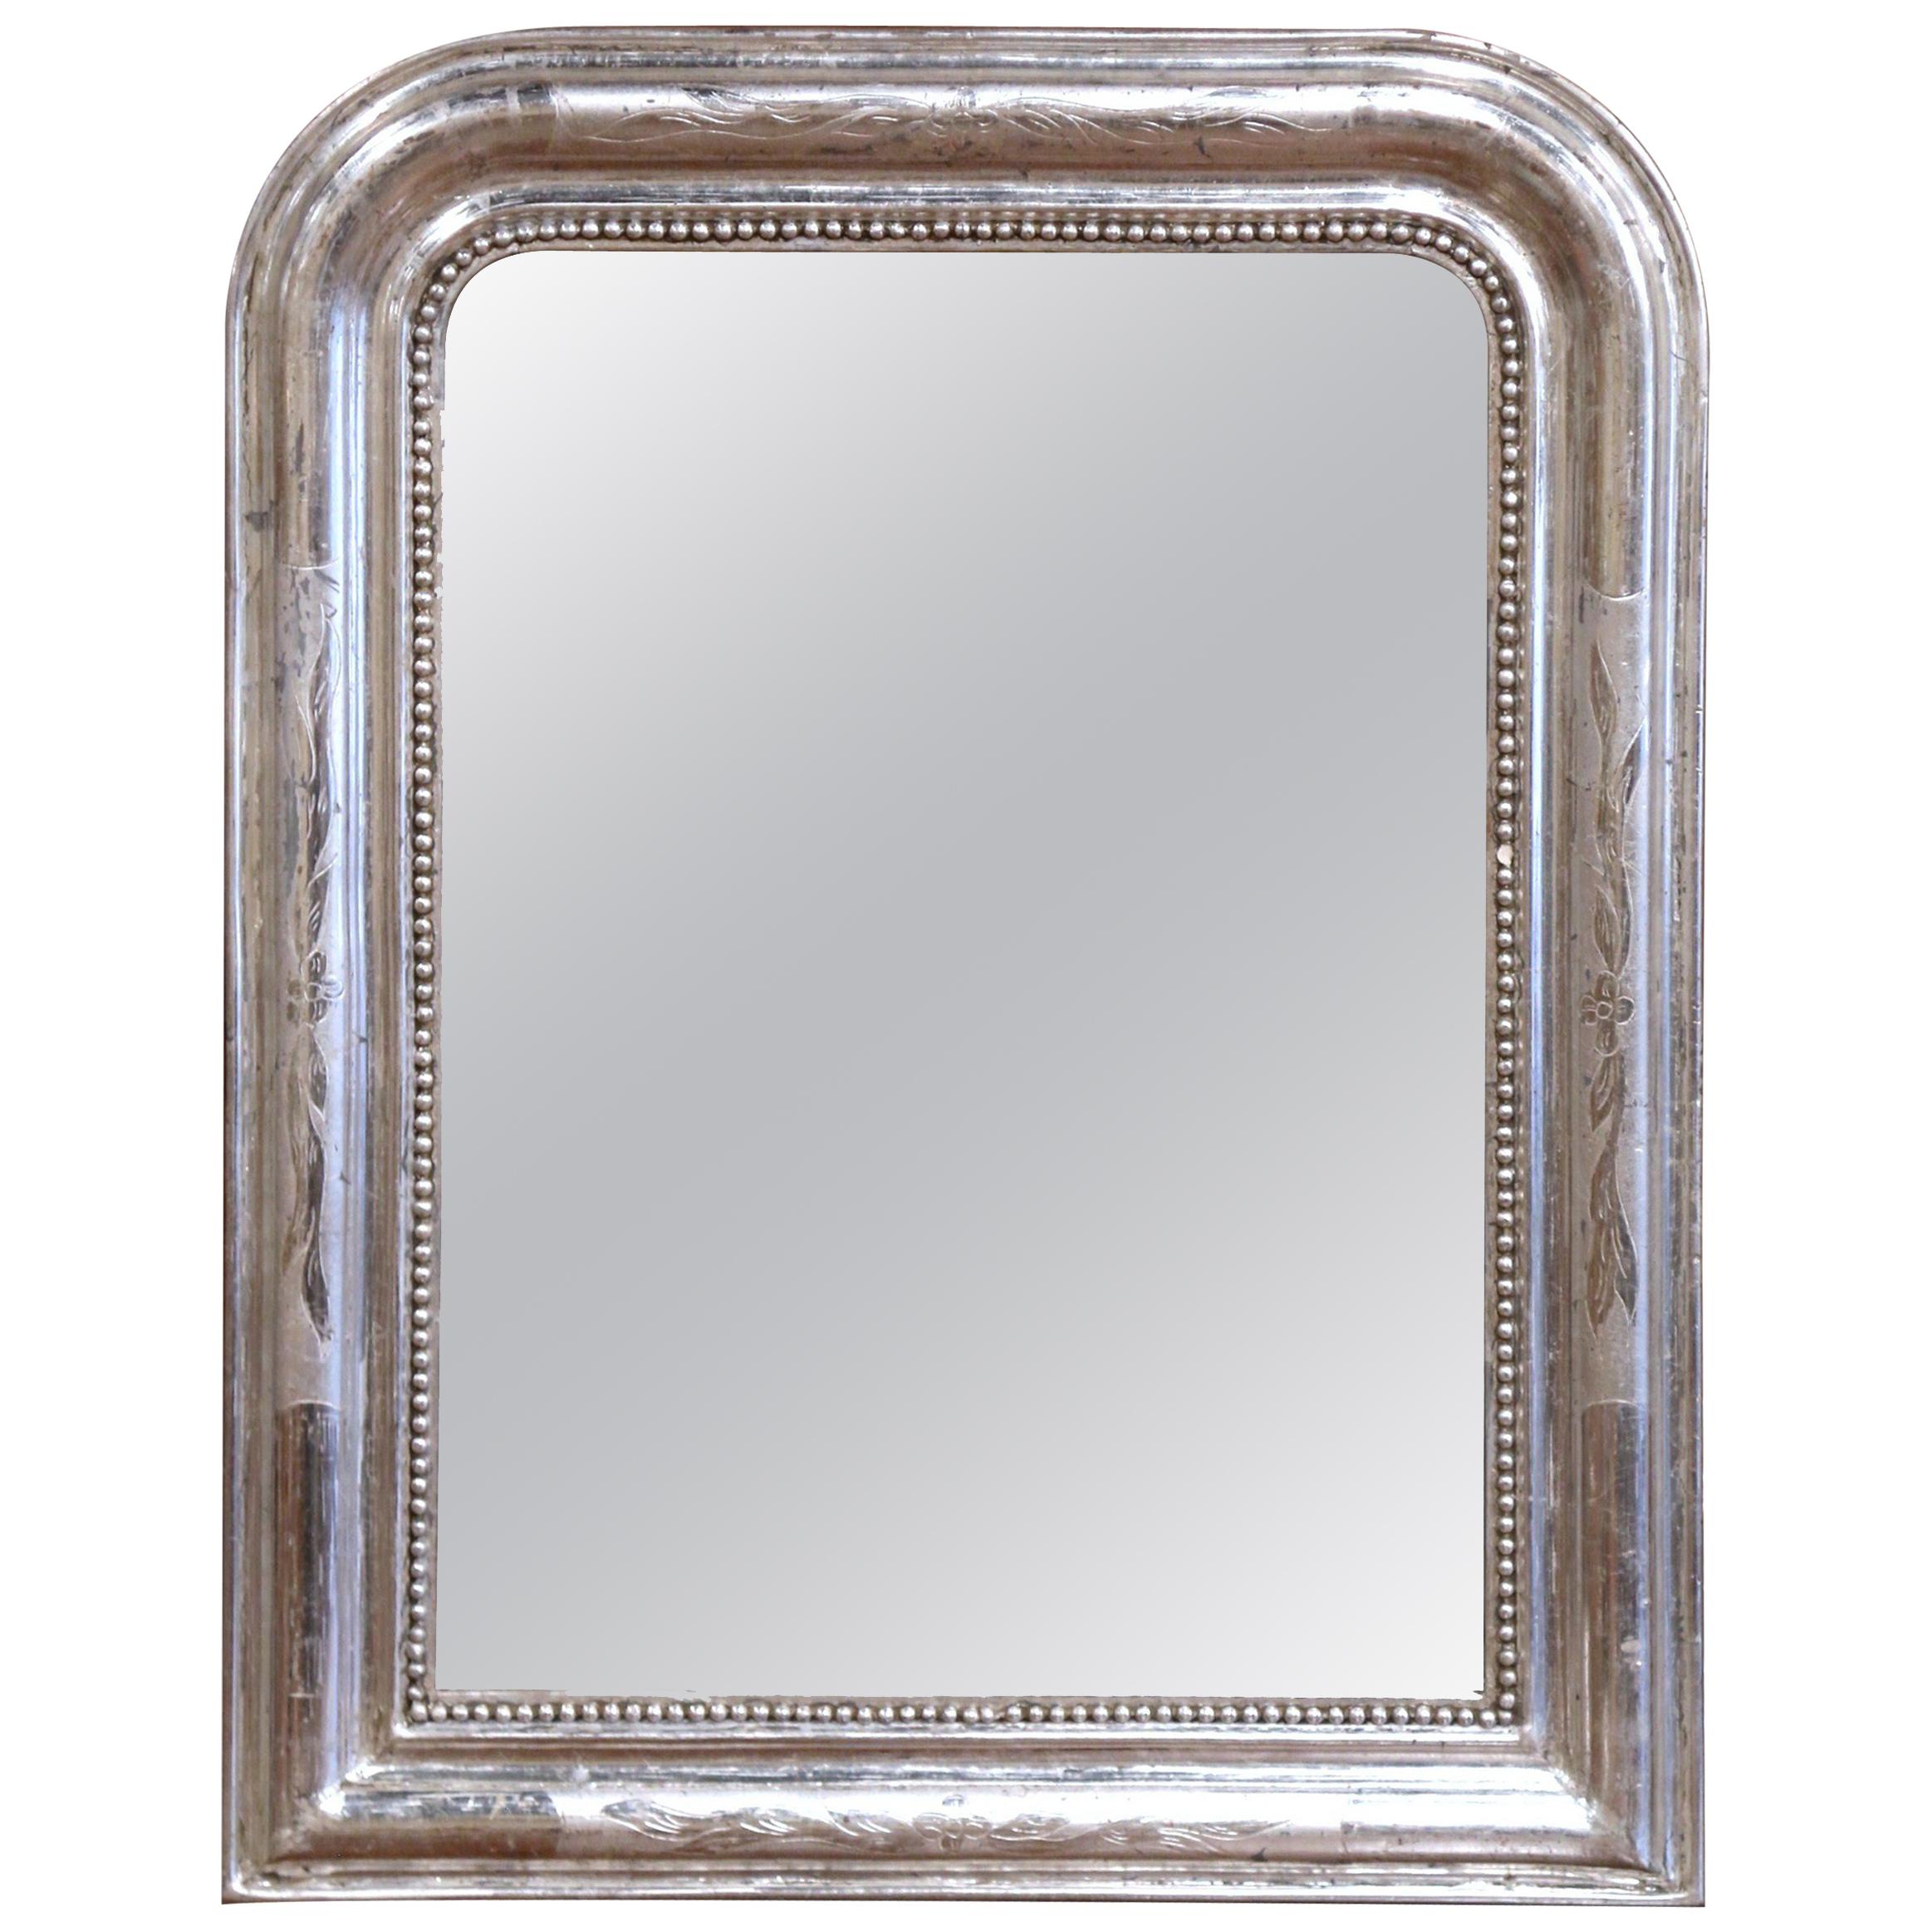 19th Century French Louis Philippe Silver Mirror with Engraved Floral Decor